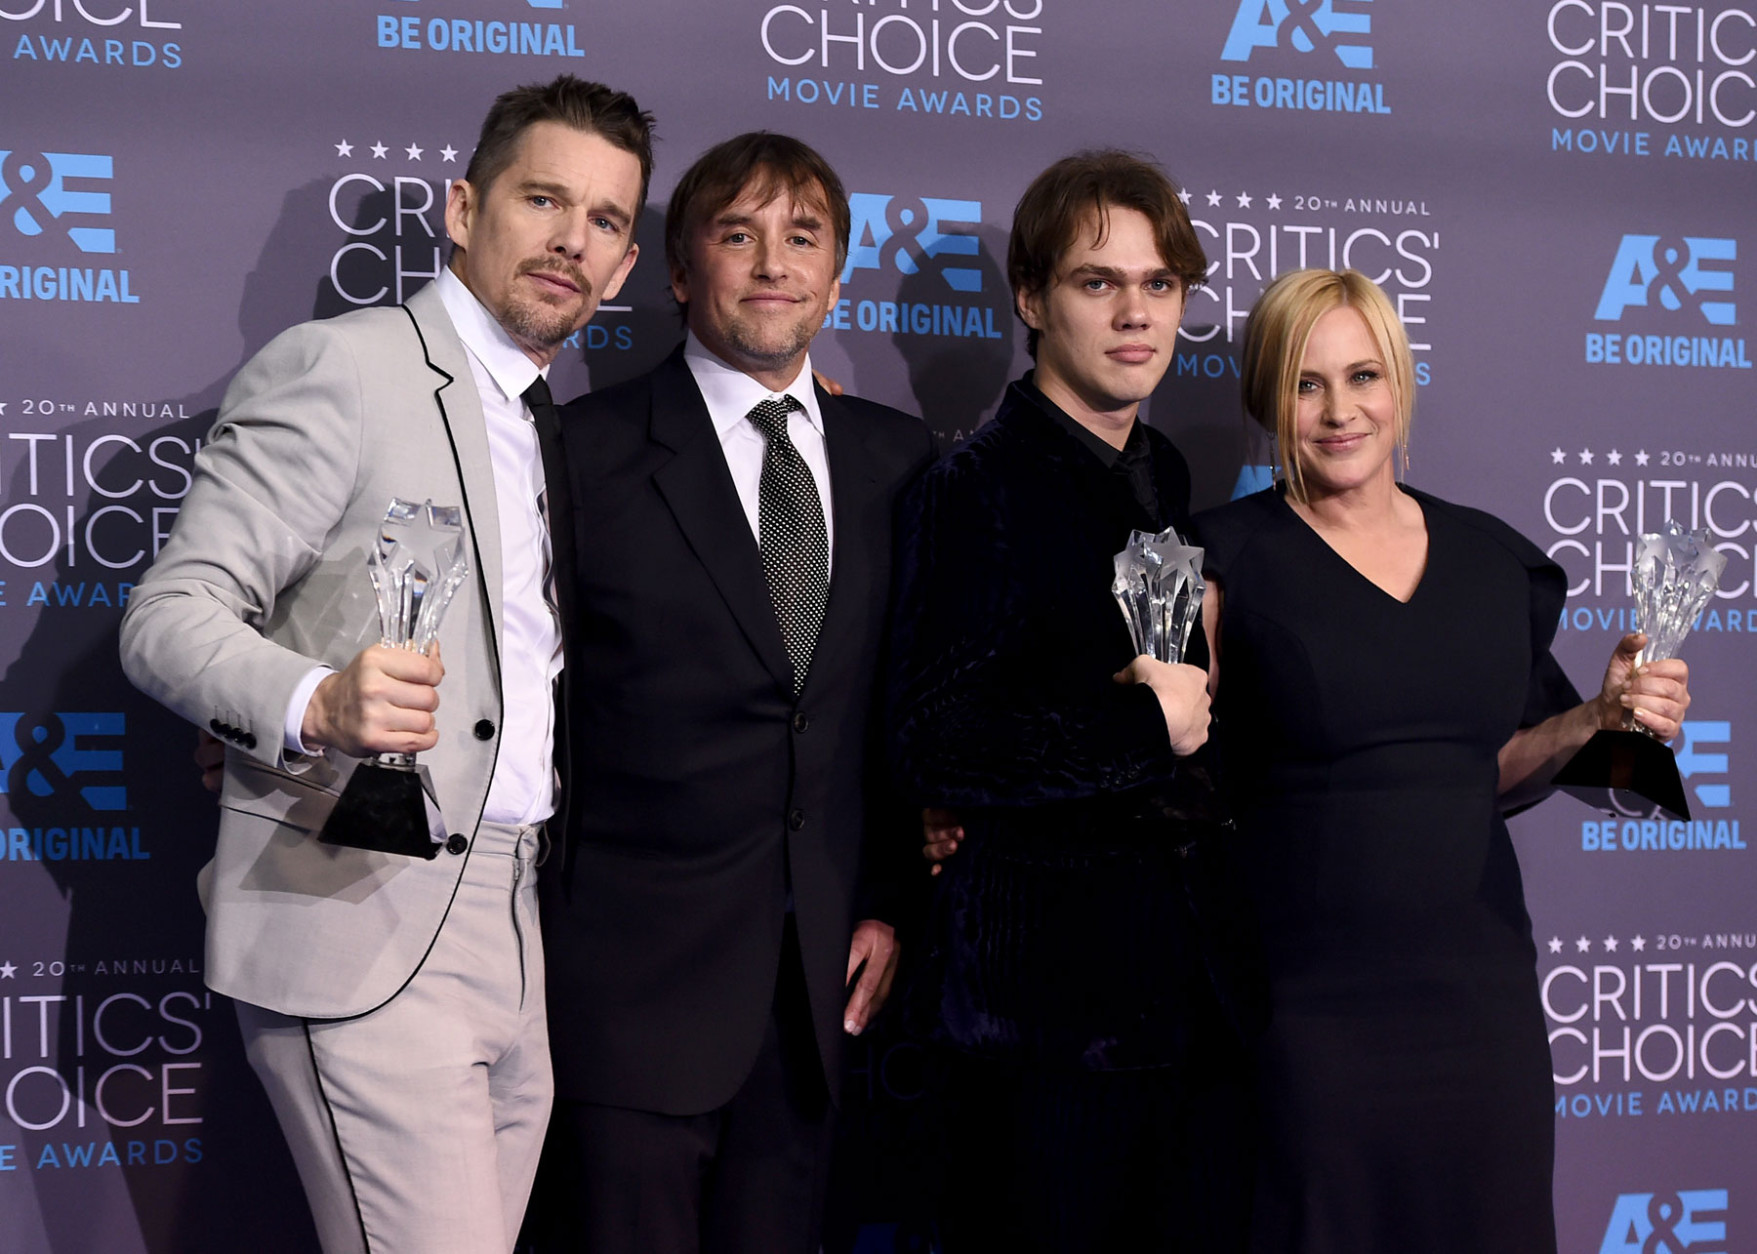 Ethan Hawke, from left, Richard Linklater, Ellar Coltrane and Patricia Arquette, of “Boyhood”, pose with the best picture award in the press room at the 20th annual Critics' Choice Movie Awards at the Hollywood Palladium on Thursday, Jan. 15, 2015, in Los Angeles. (Photo by Jordan Strauss/Invision/AP)